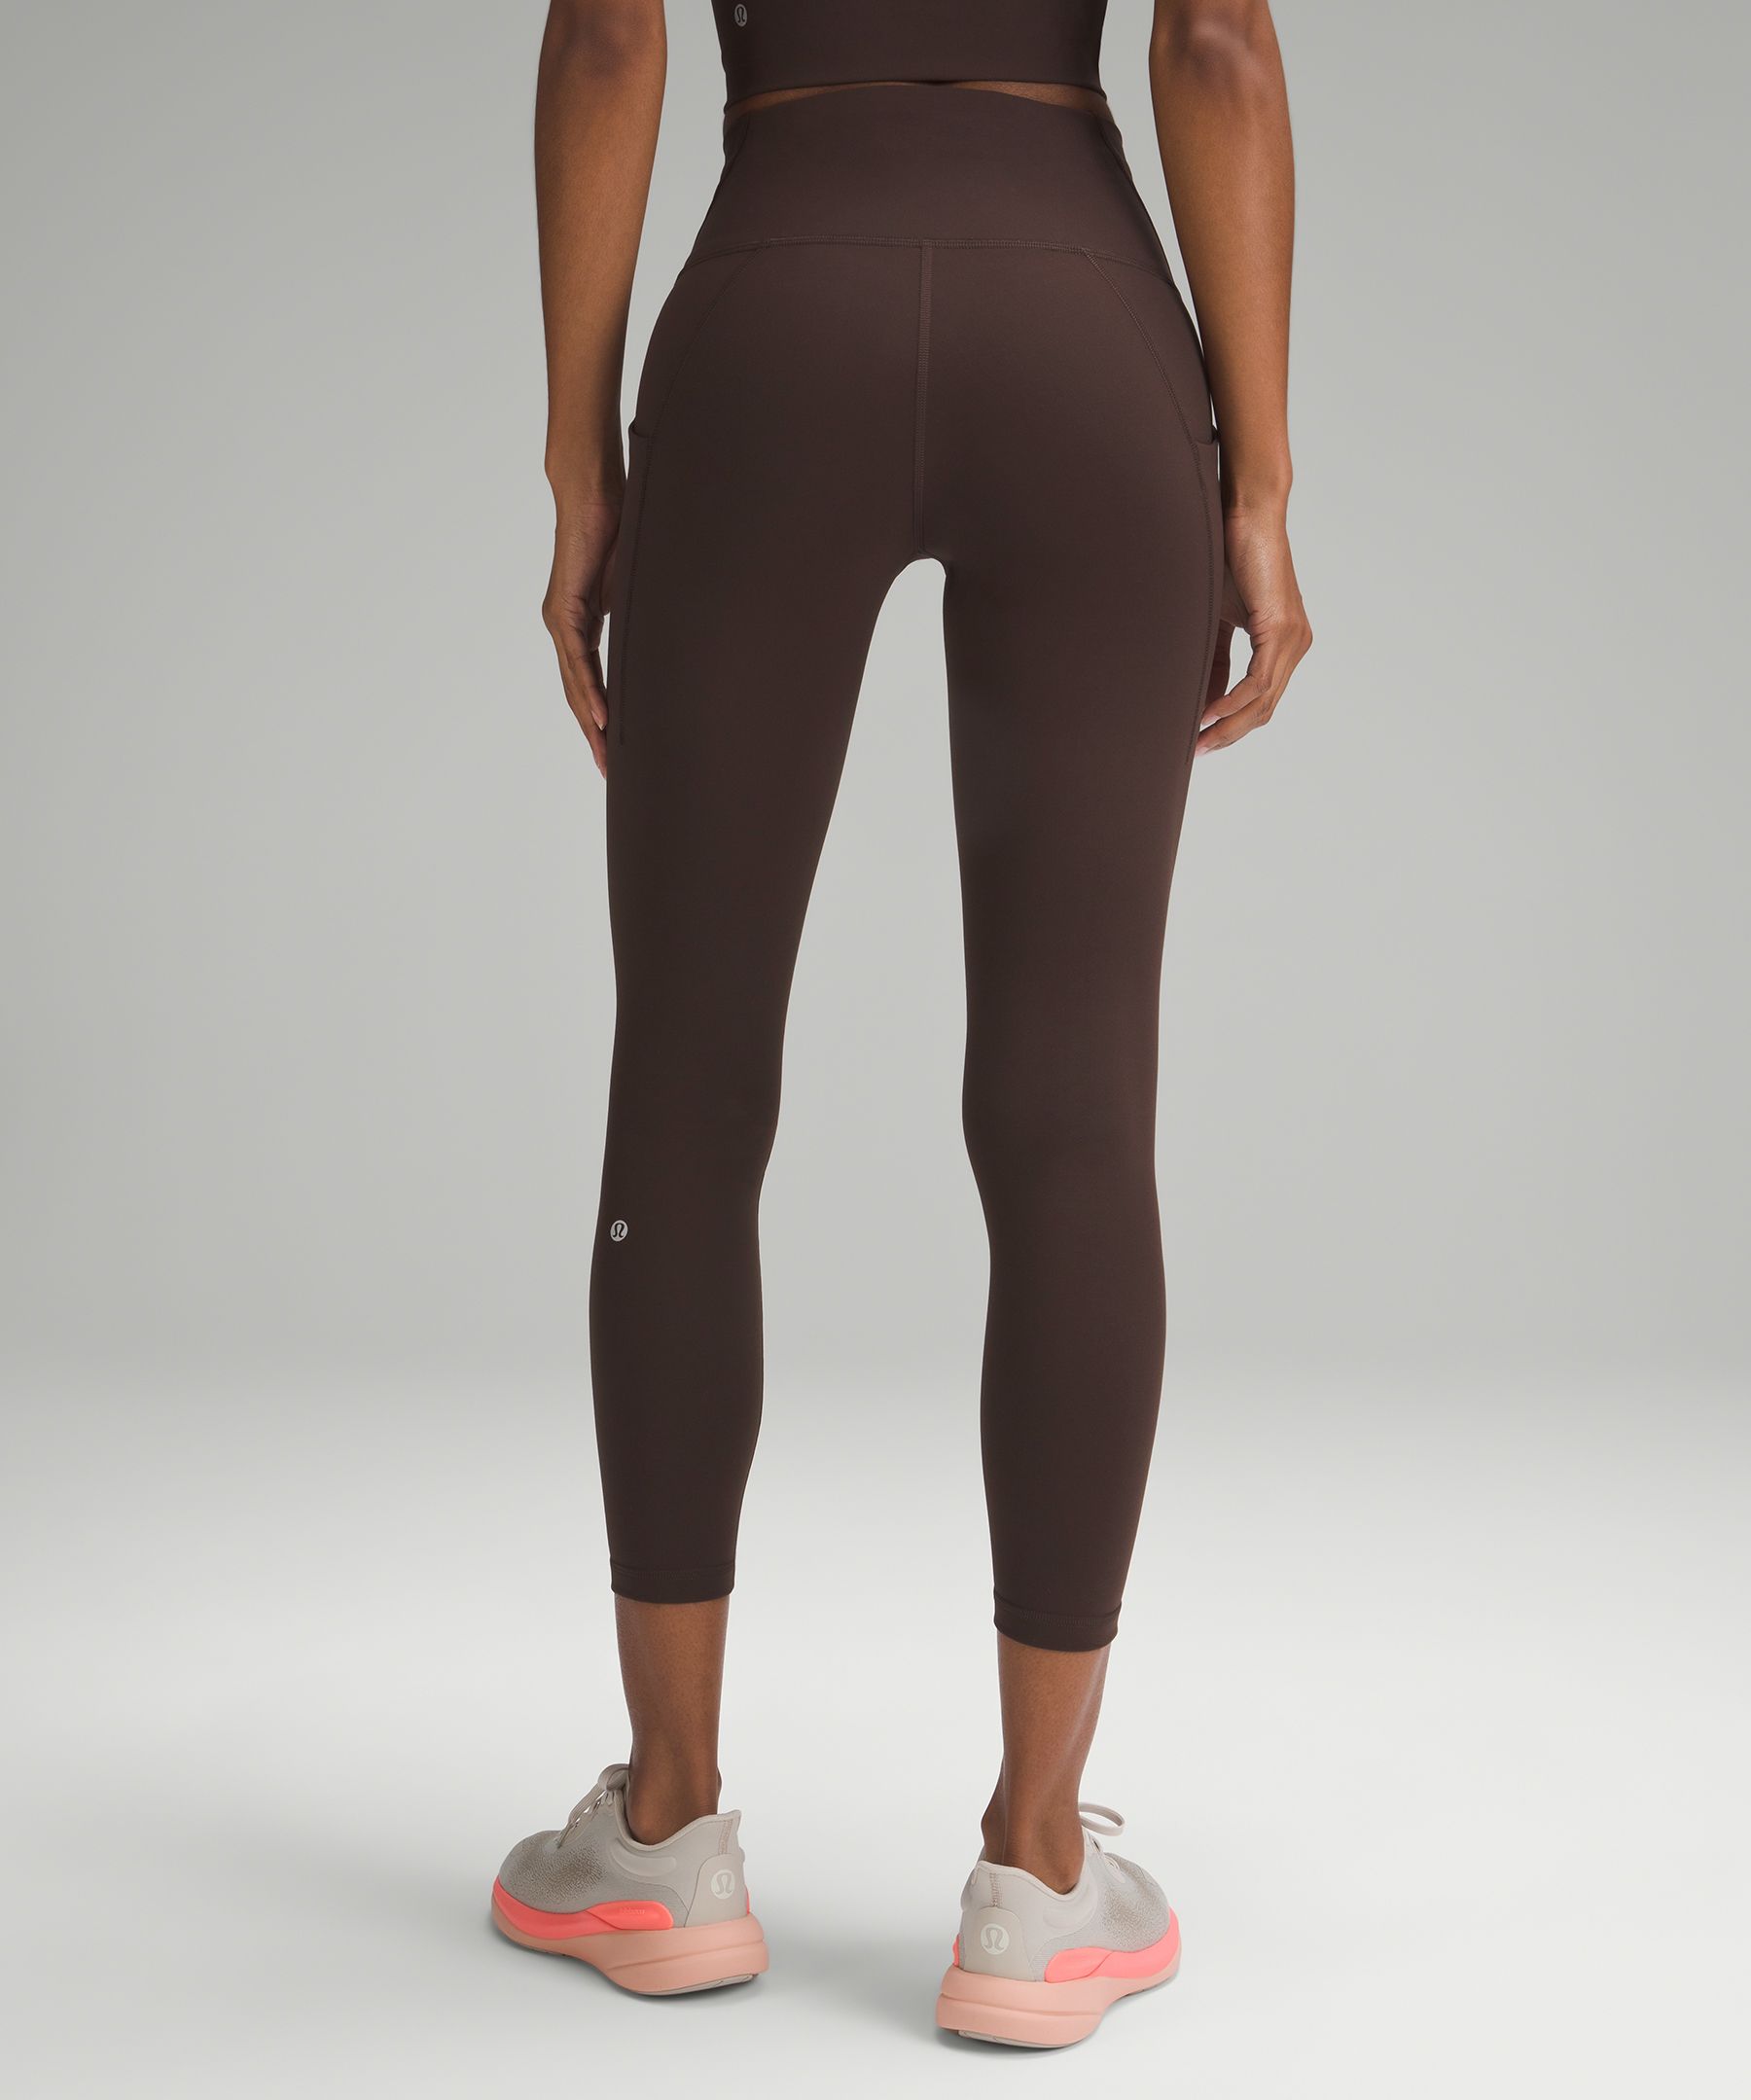 Lululemon athletica Wunder Train High-Rise Tight with Pockets 25, Women's  Leggings/Tights